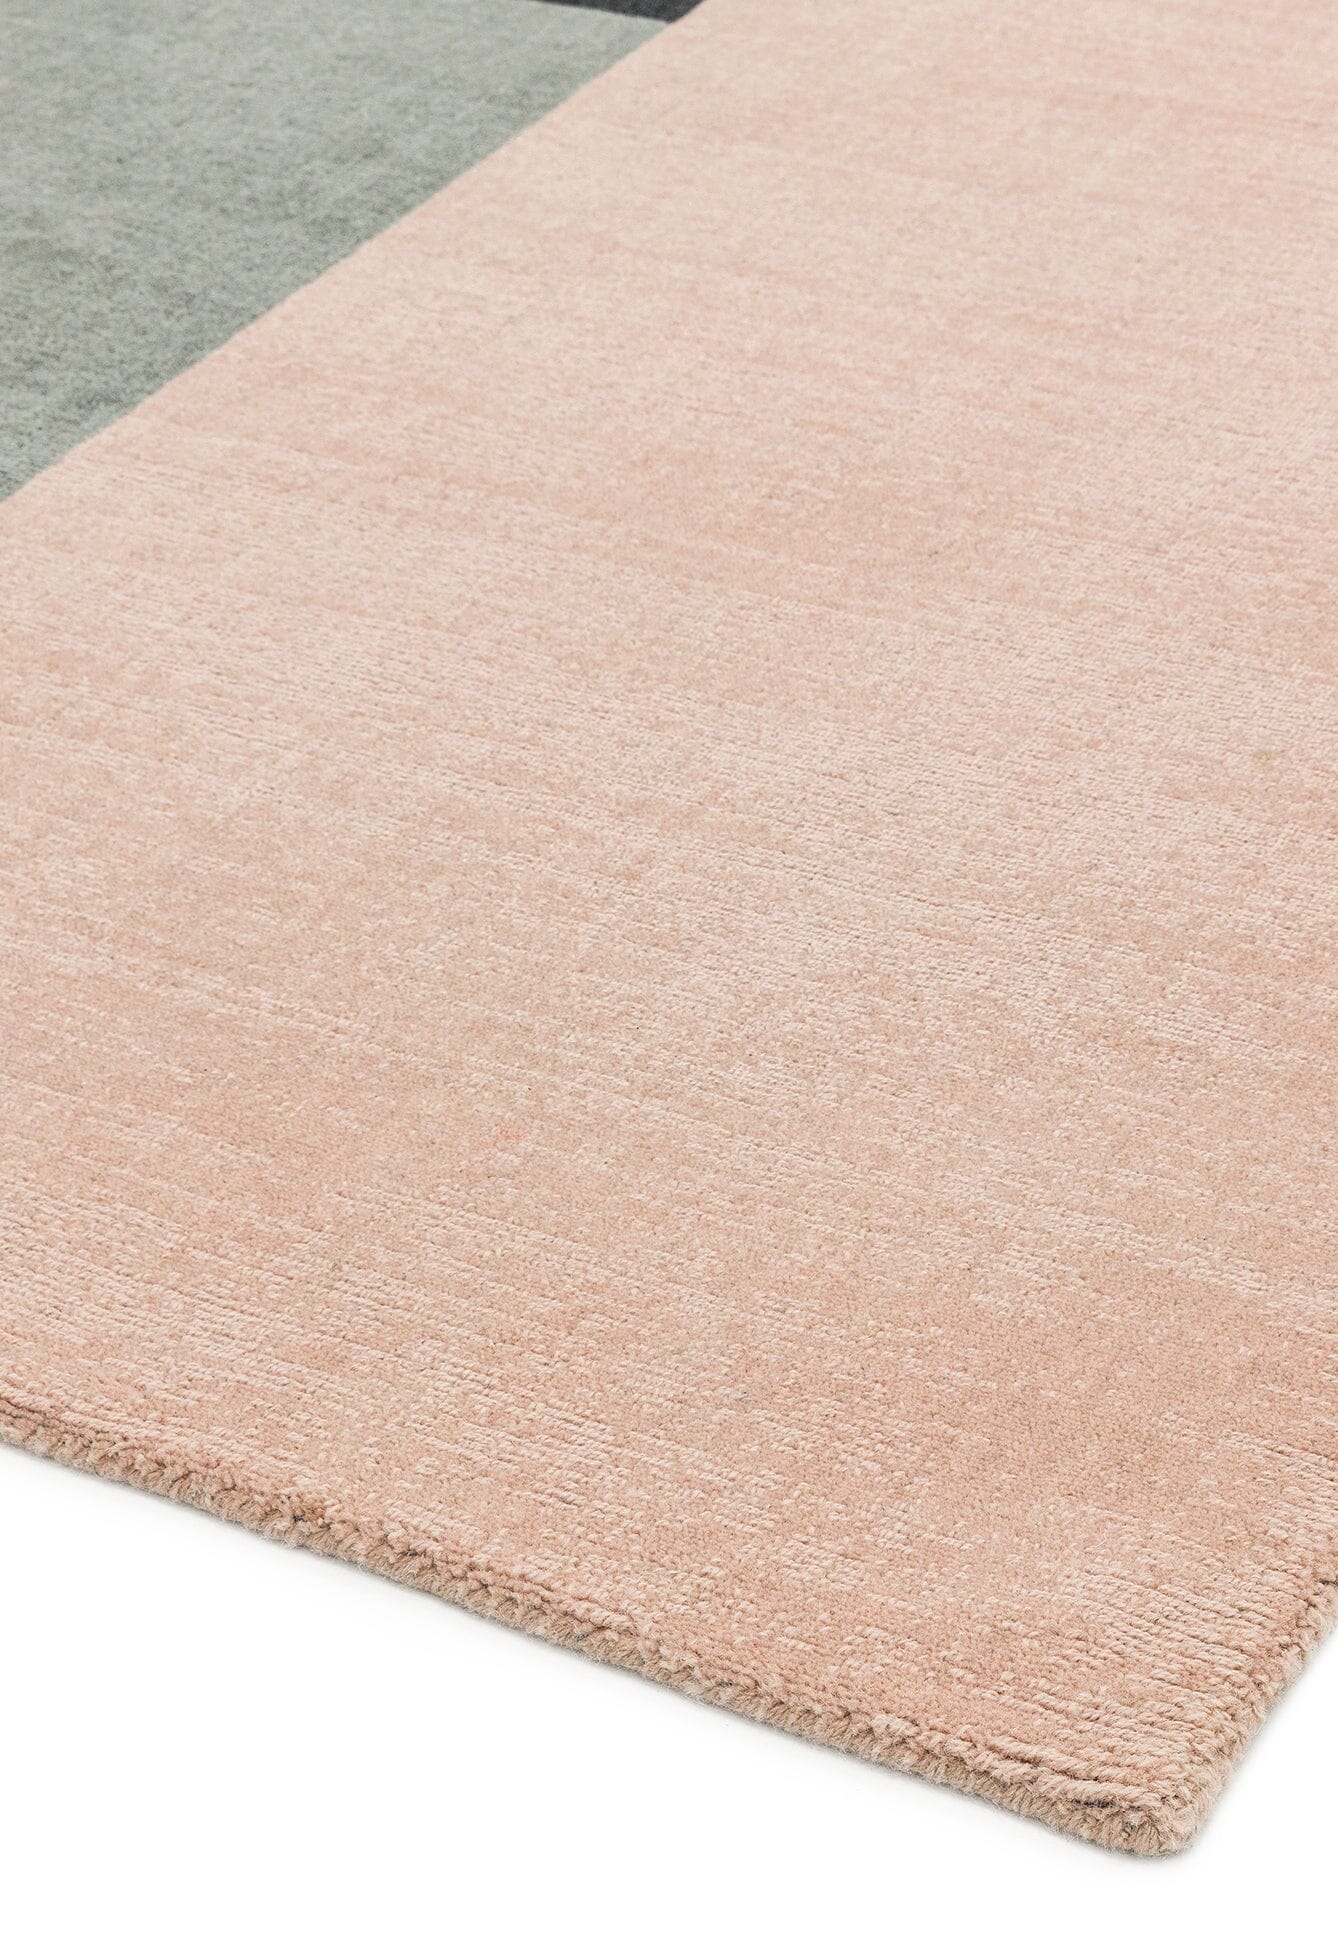  Asiatic Carpets-Asiatic Carpets Blox Hand Woven Rug Pink - 200 x 300cm-Multicoloured 941 